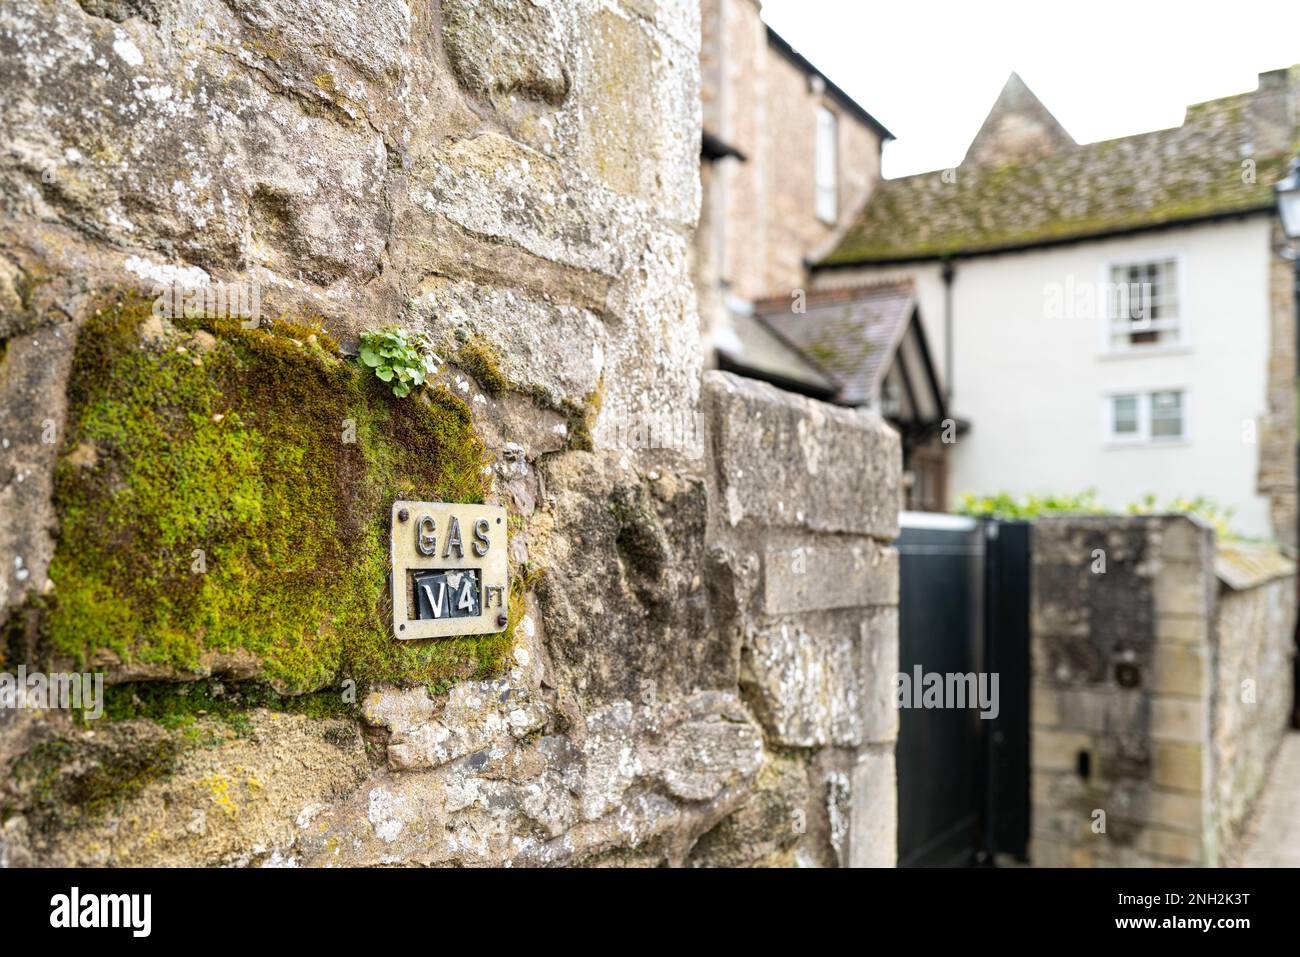 Shallow focus of a mains gas location marker built into a medieval stone wall. A nearby town house is visible. Stock Photo